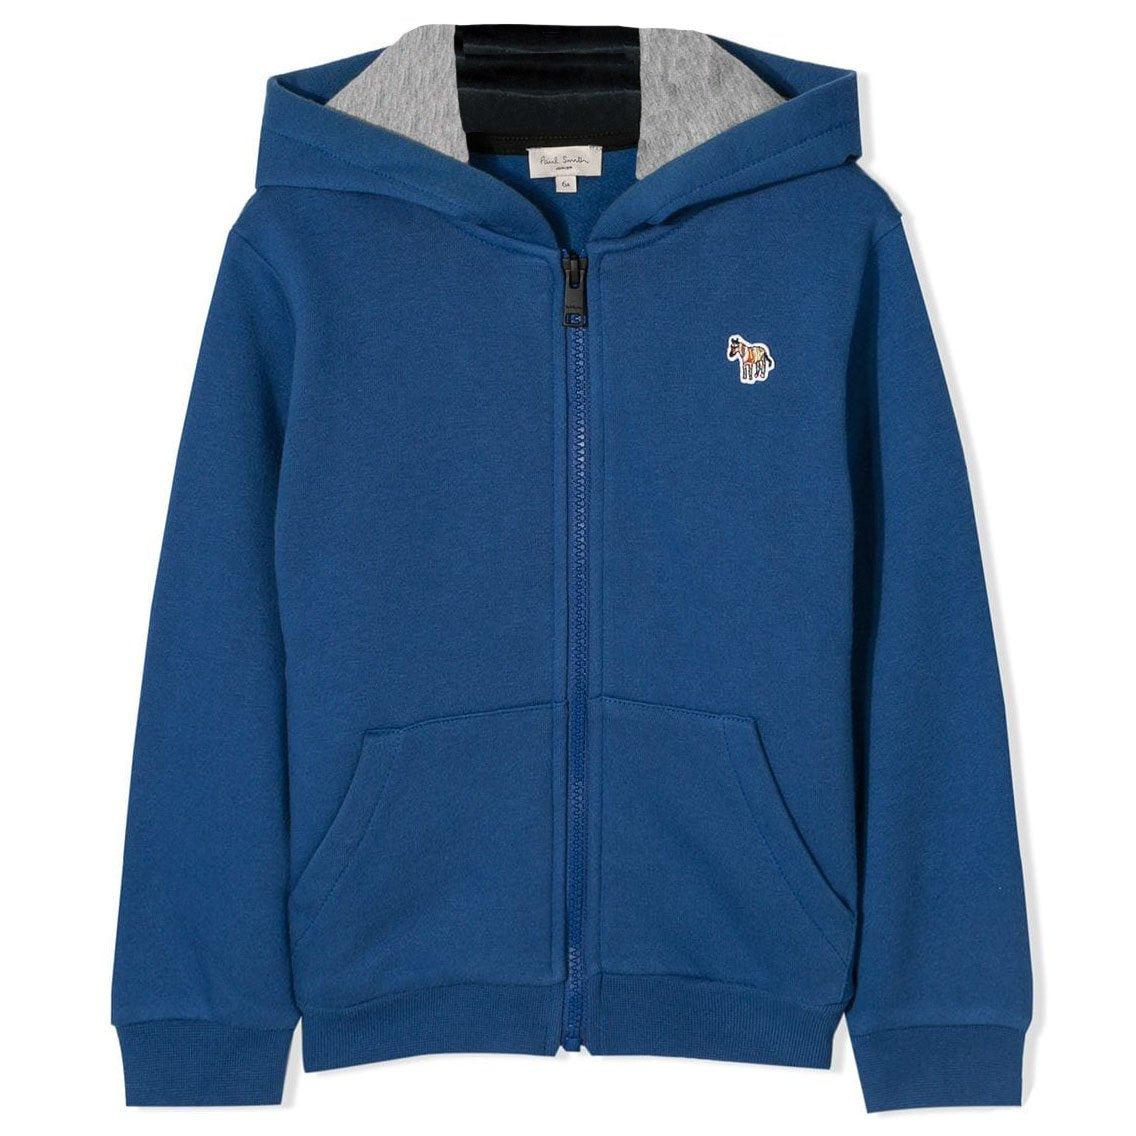 Boys Blue Hooded Cotton Top